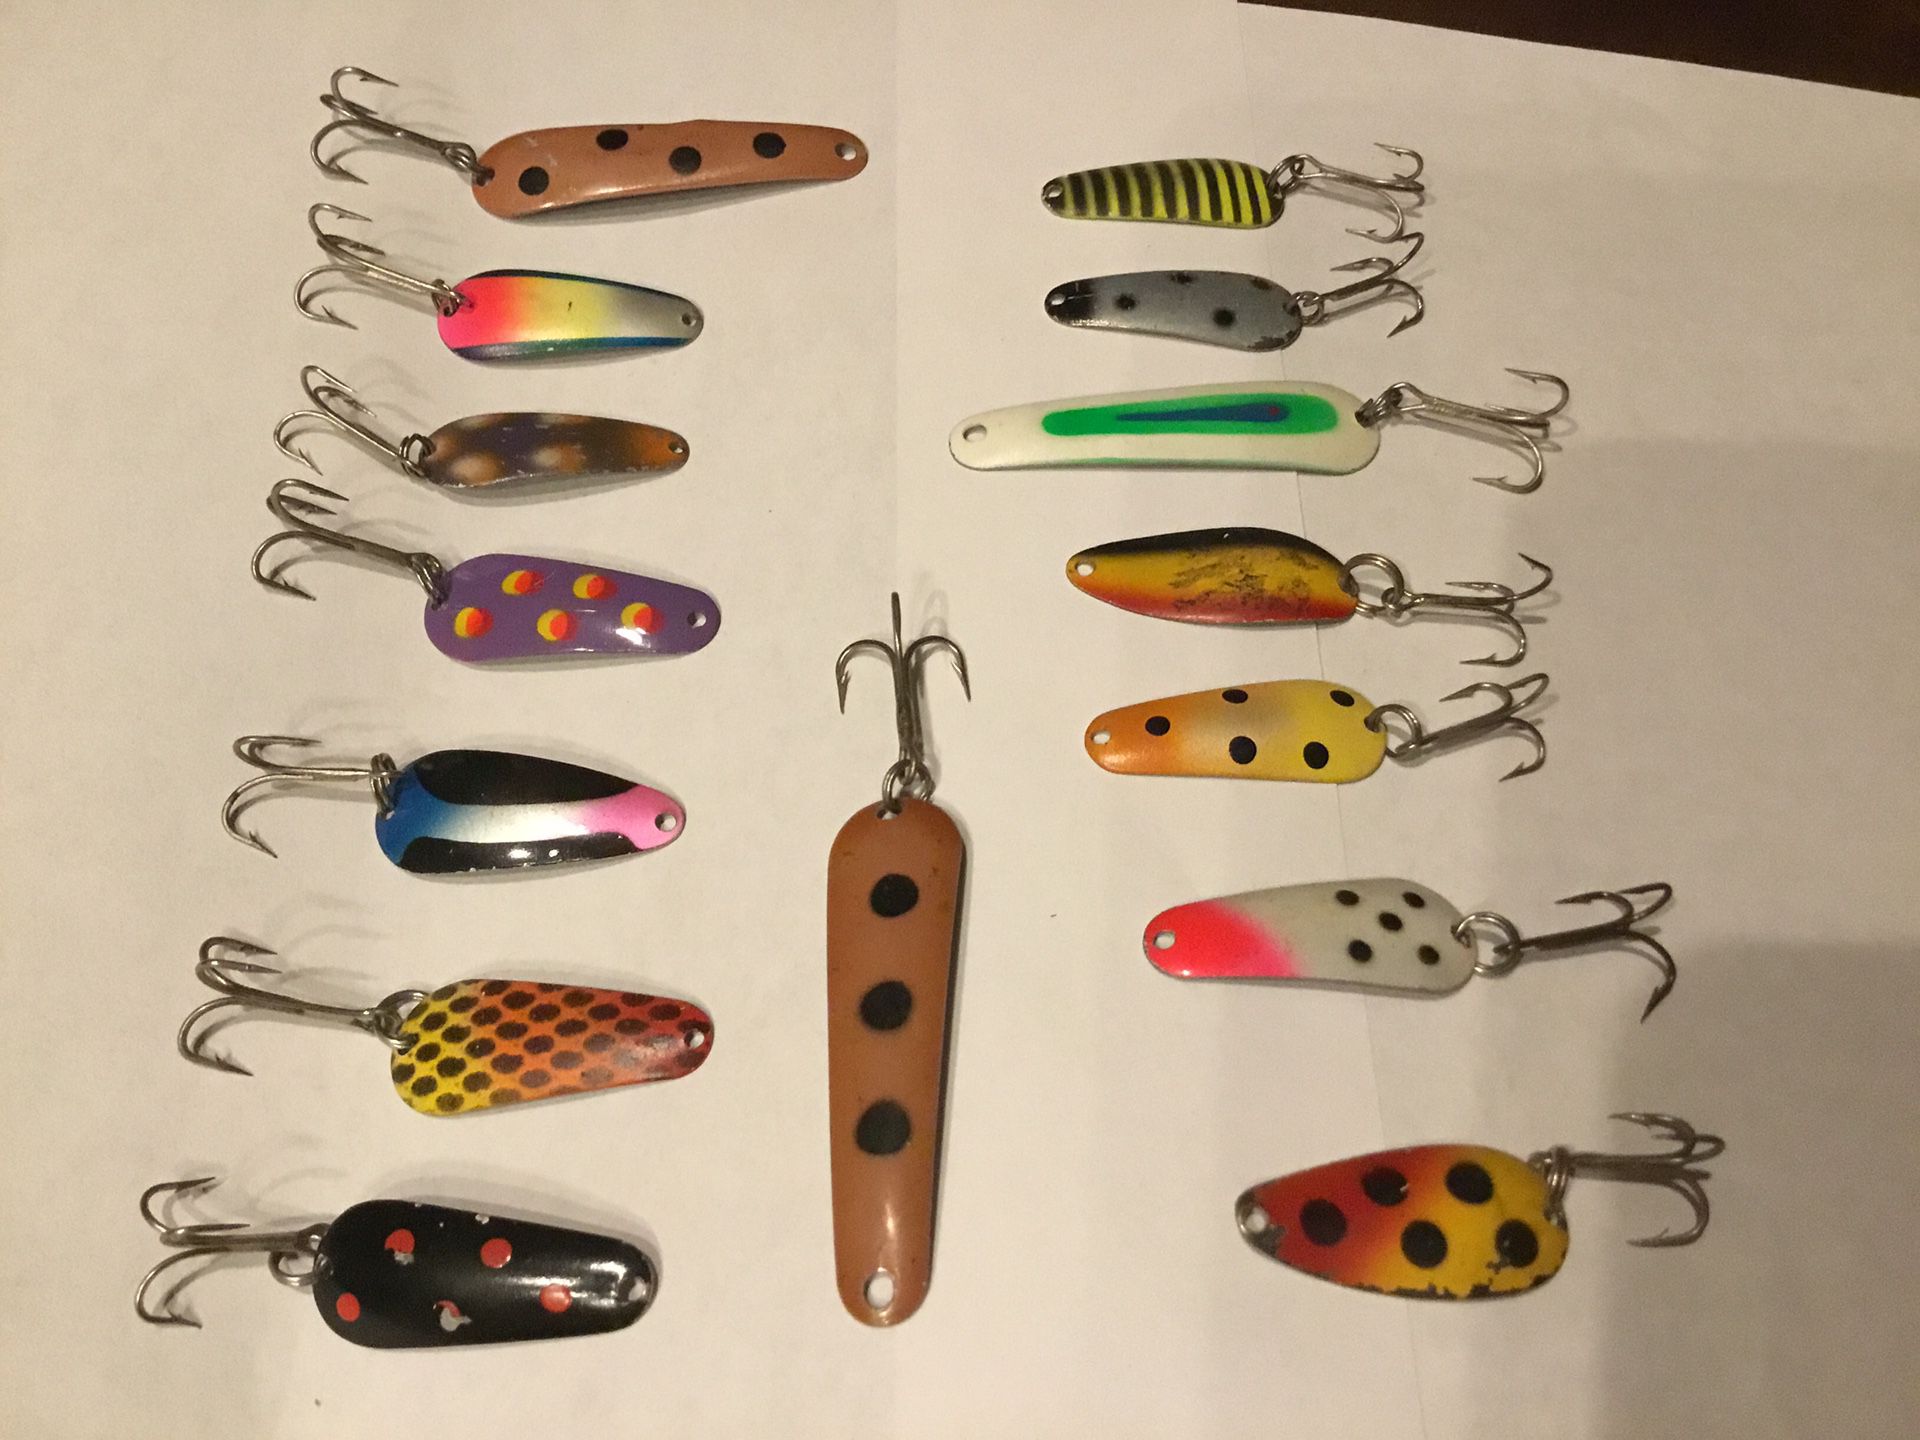 6 different sets of 15 assrt shapes and sizes of very colorful walleye spoon fishing lures $45 per order